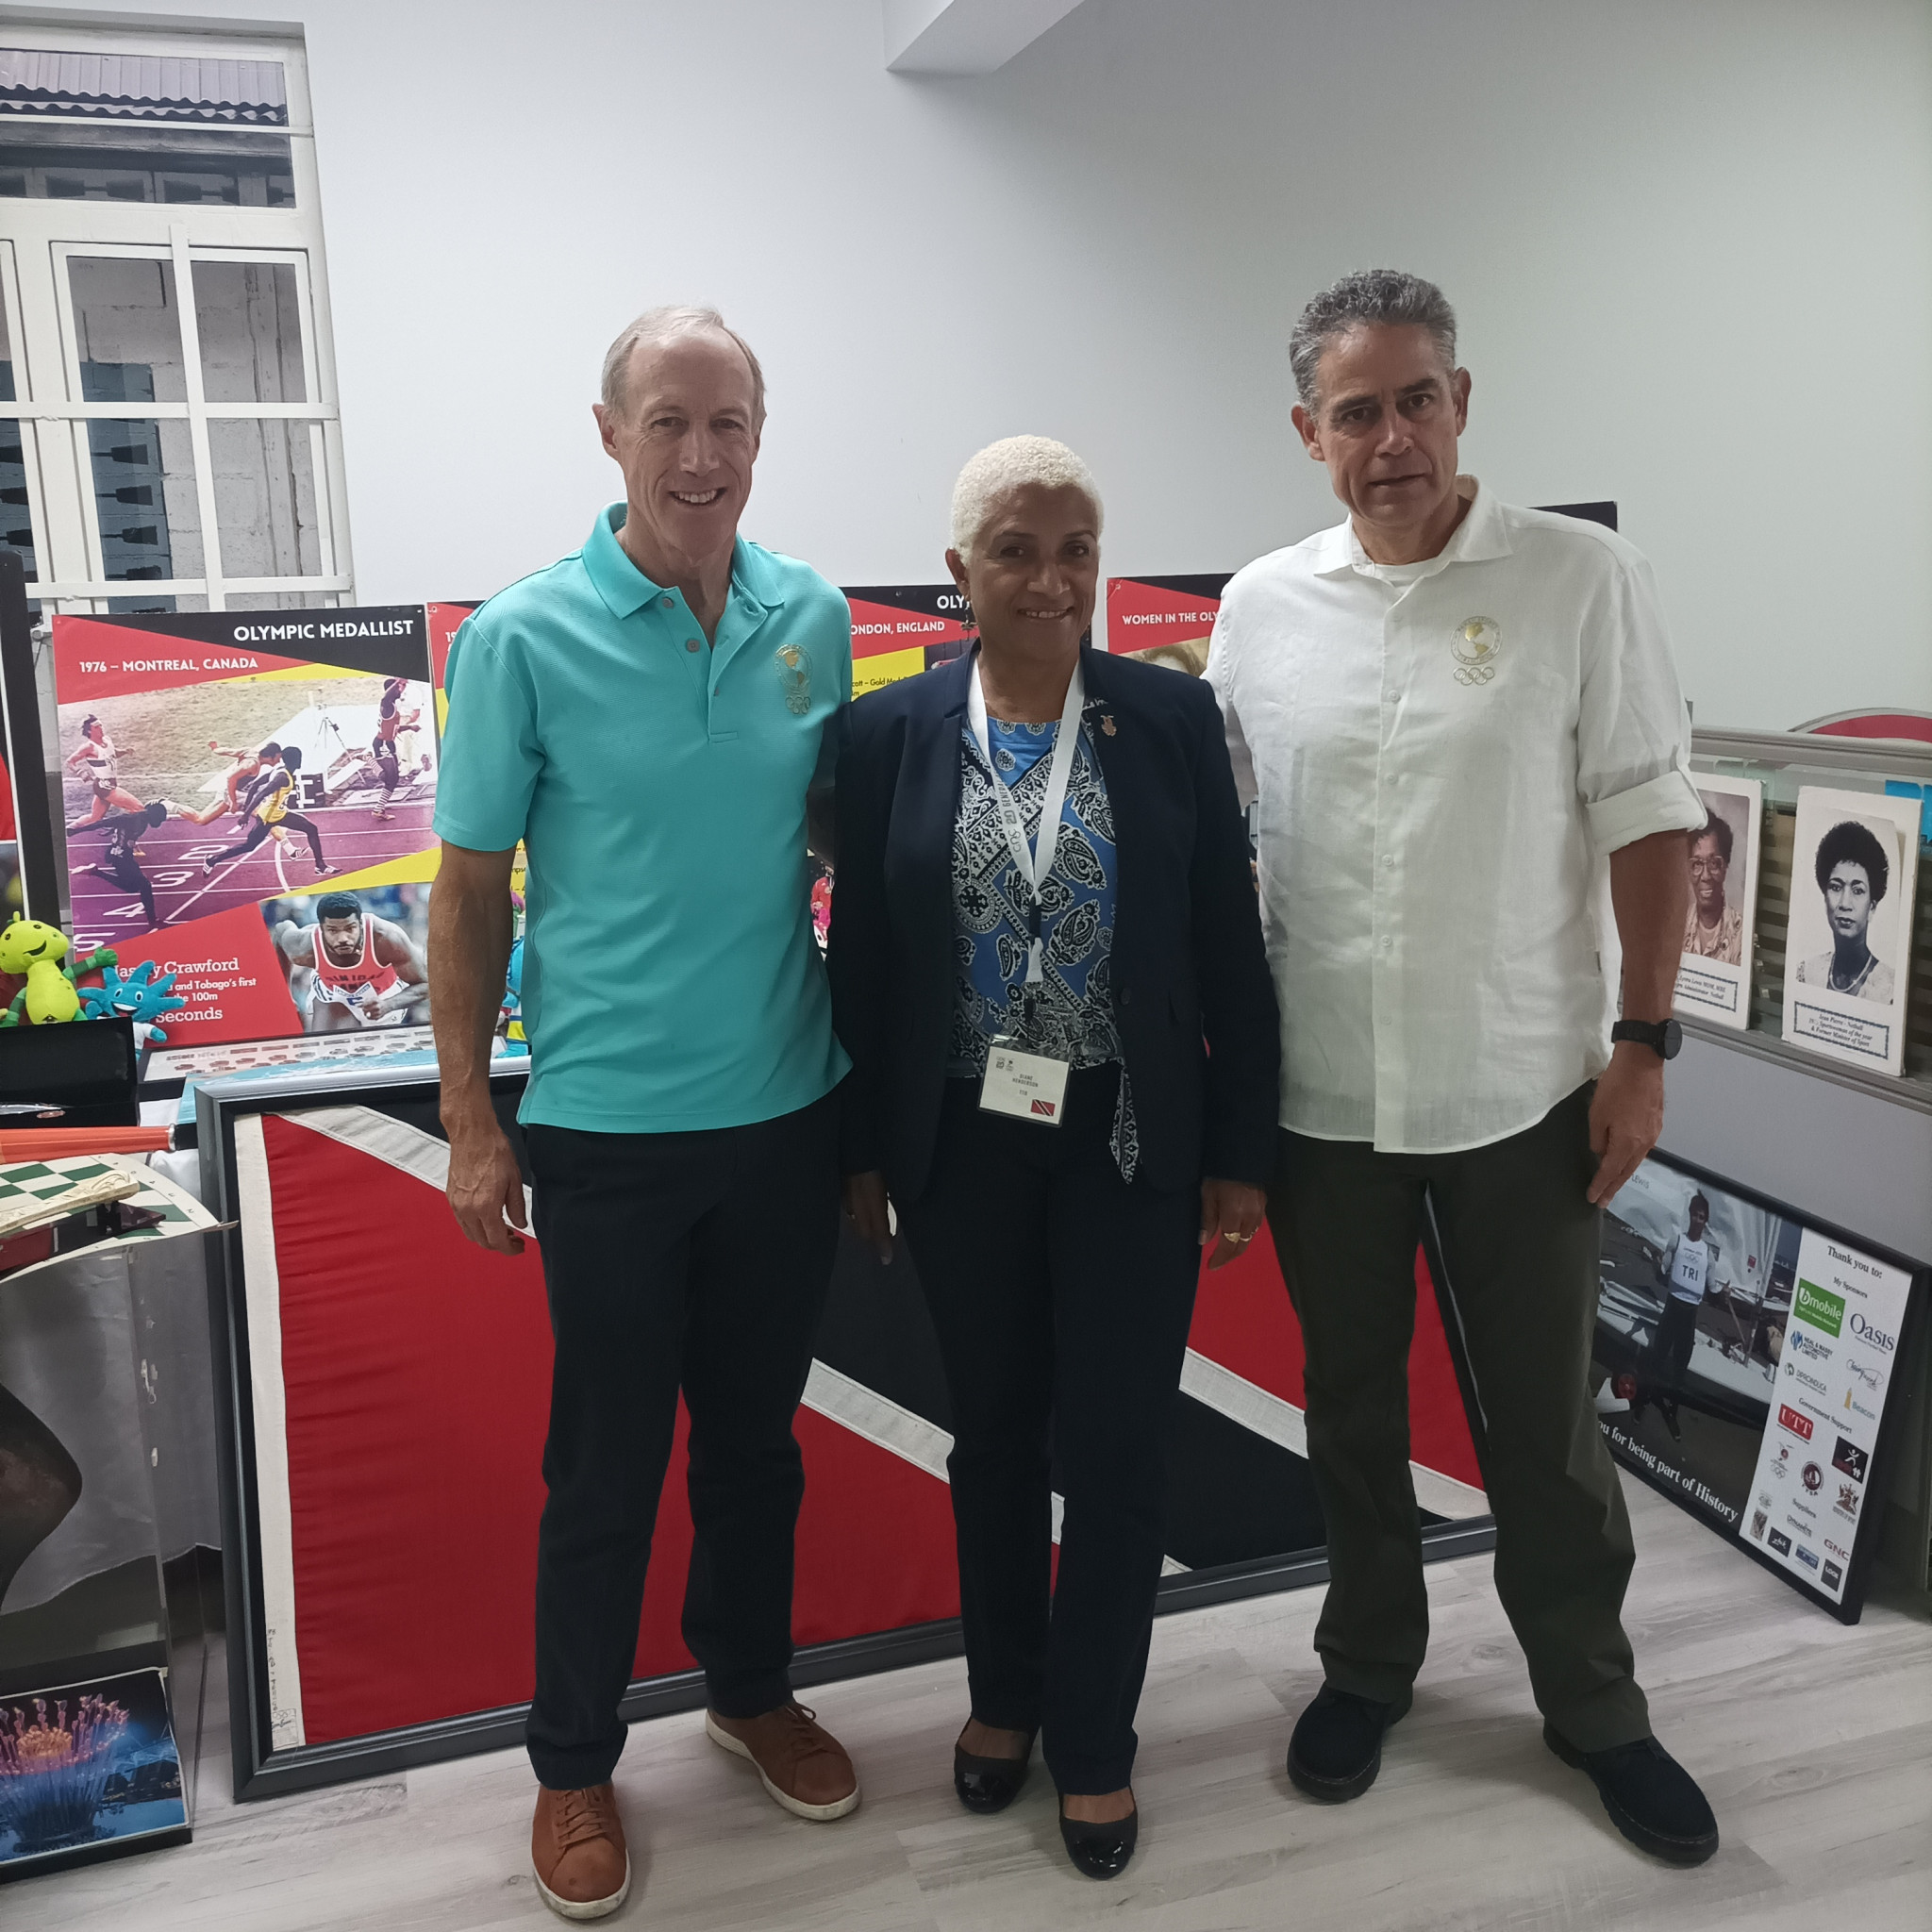 Trinidad and Tobago Olympic Committee President Diane Henderson, centre, with Panam Sports chief executive Ivar Sisniega, left, and Ricardo Probert, right ©ITG